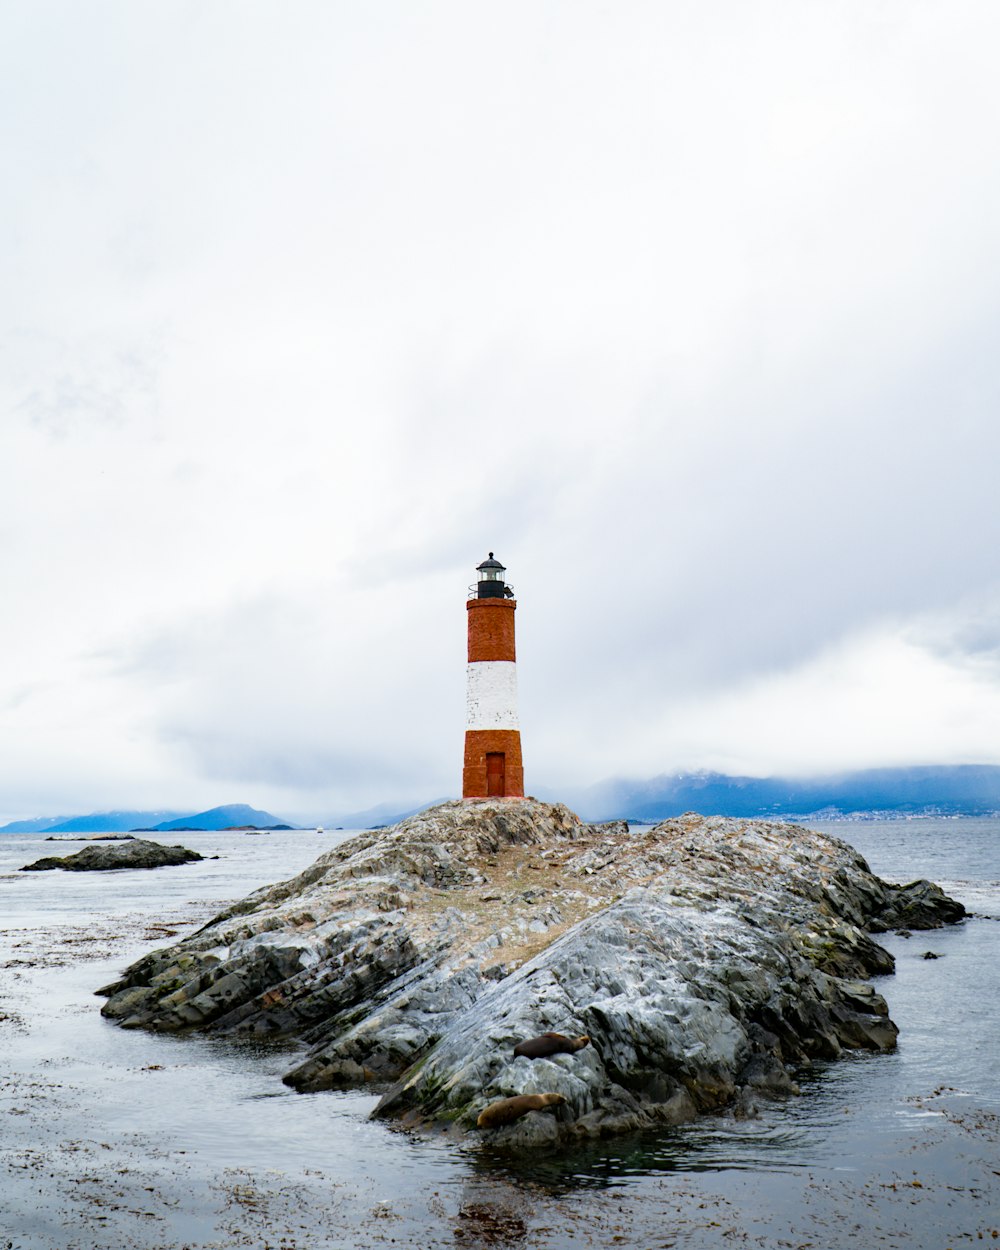 brown and white lighthouse on gray rock formation near body of water during daytime